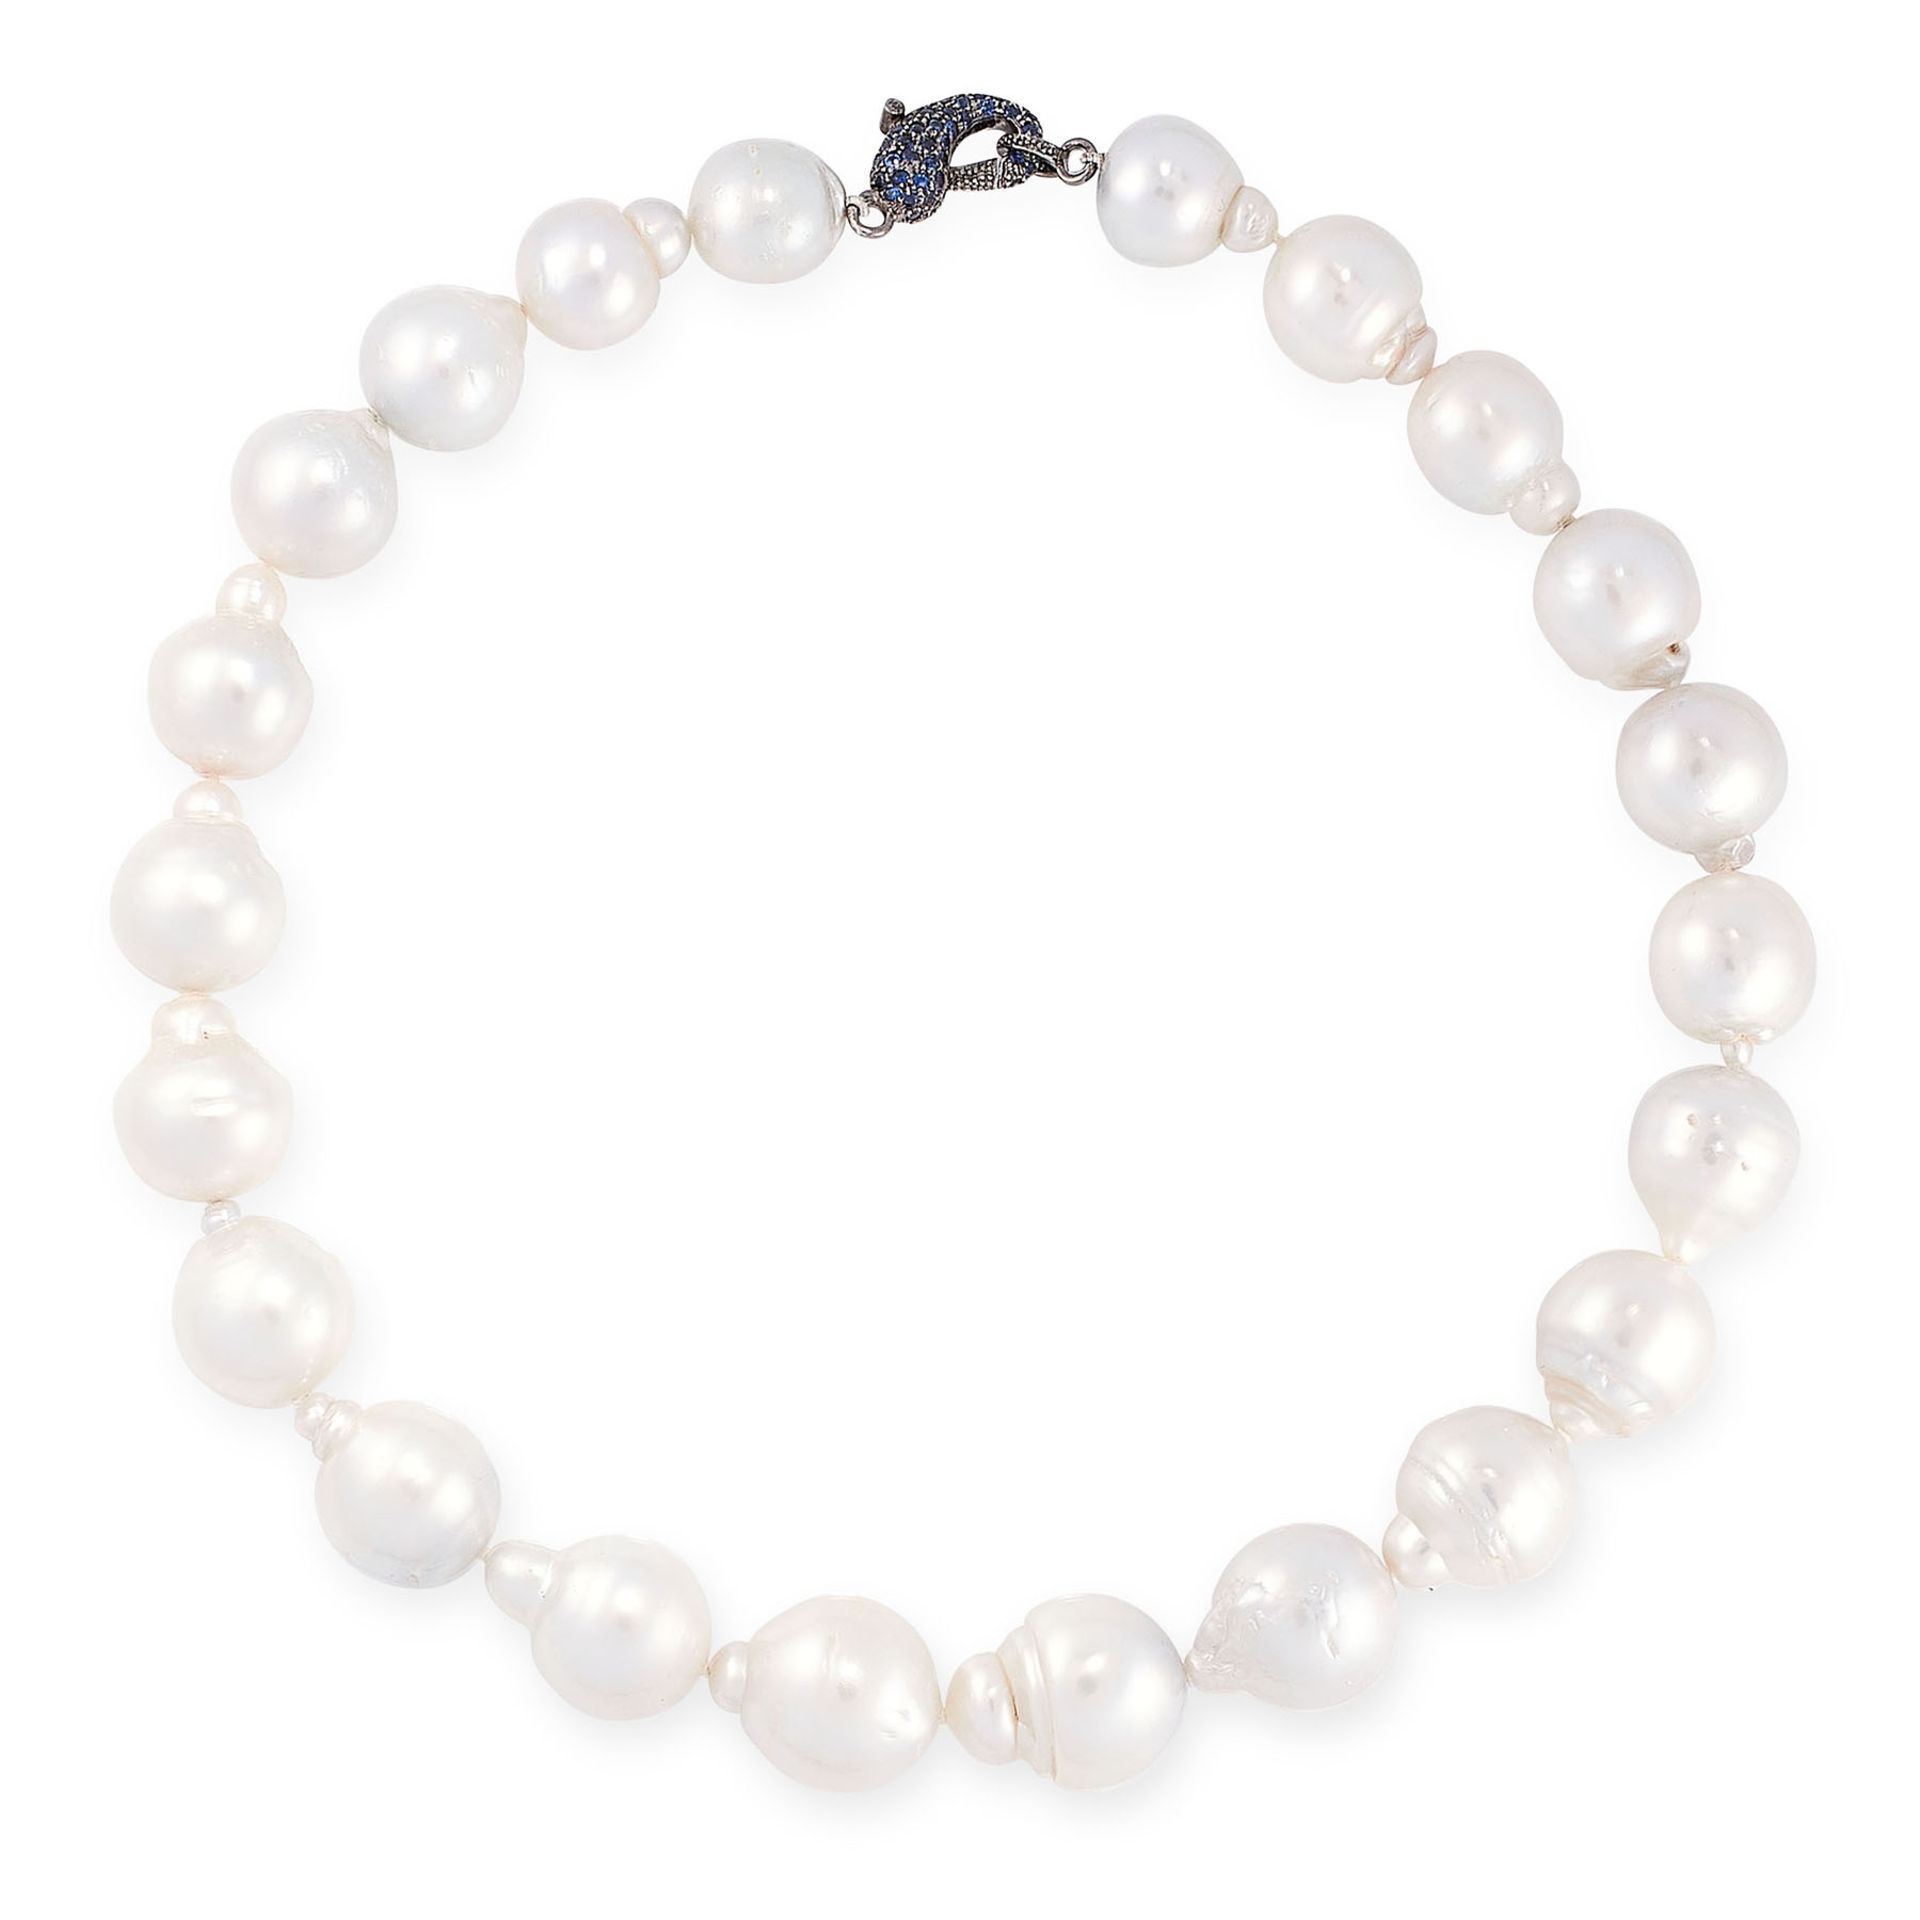 A BAROQUE PEARL AND SAPPHIRE NECKLACE in 14ct white gold, set with twenty two baroque pearls on a